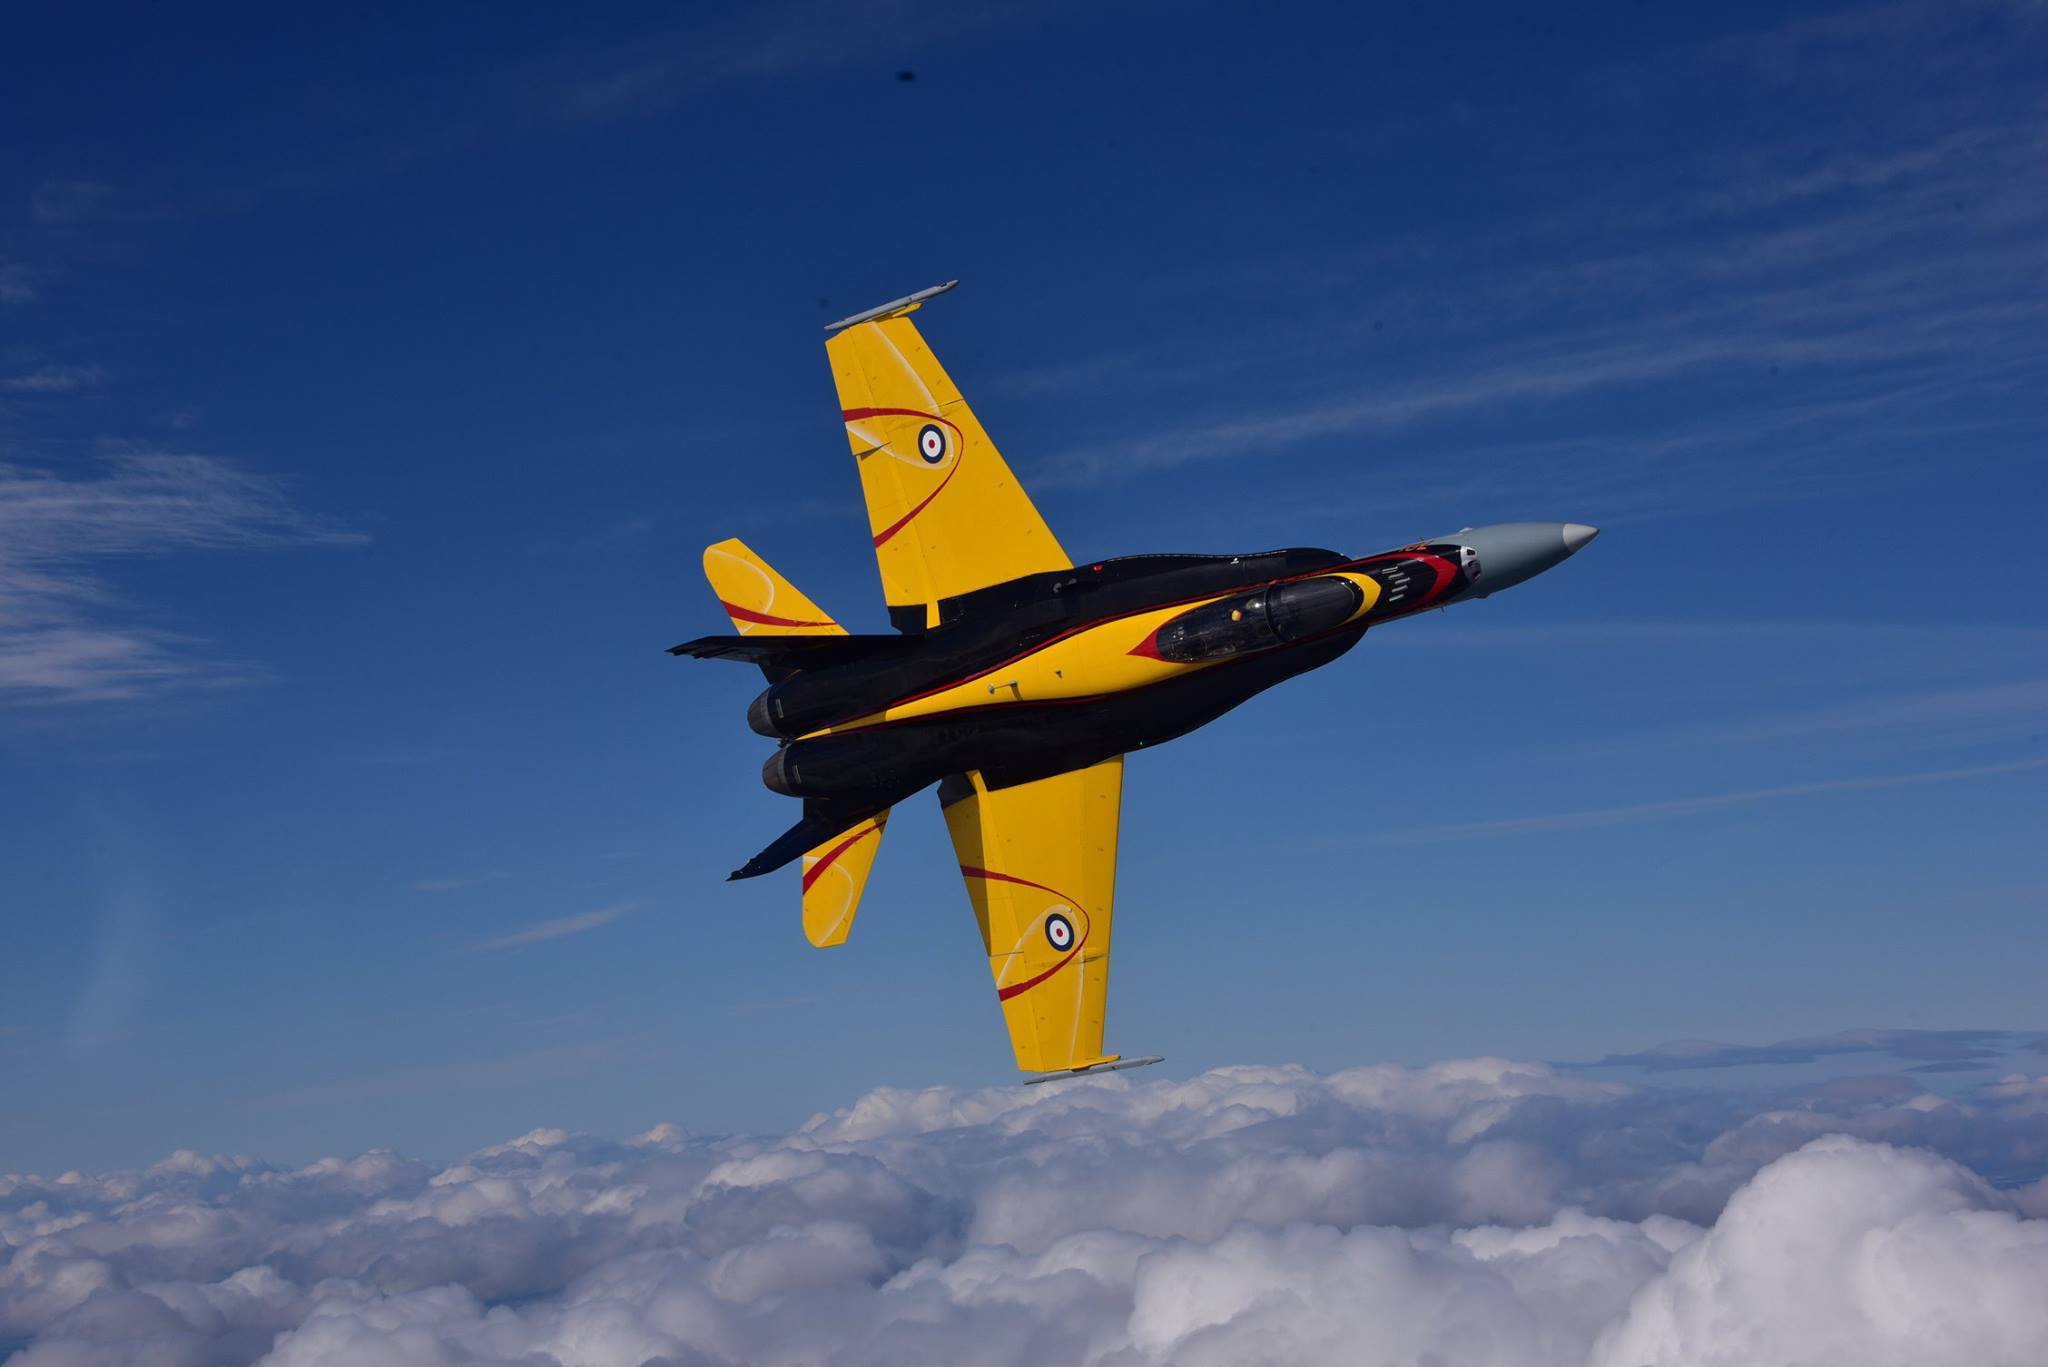 The CF-18 Demonstration jet takes to the sky during its first day of flying! PHOTO: © Mike Reyno